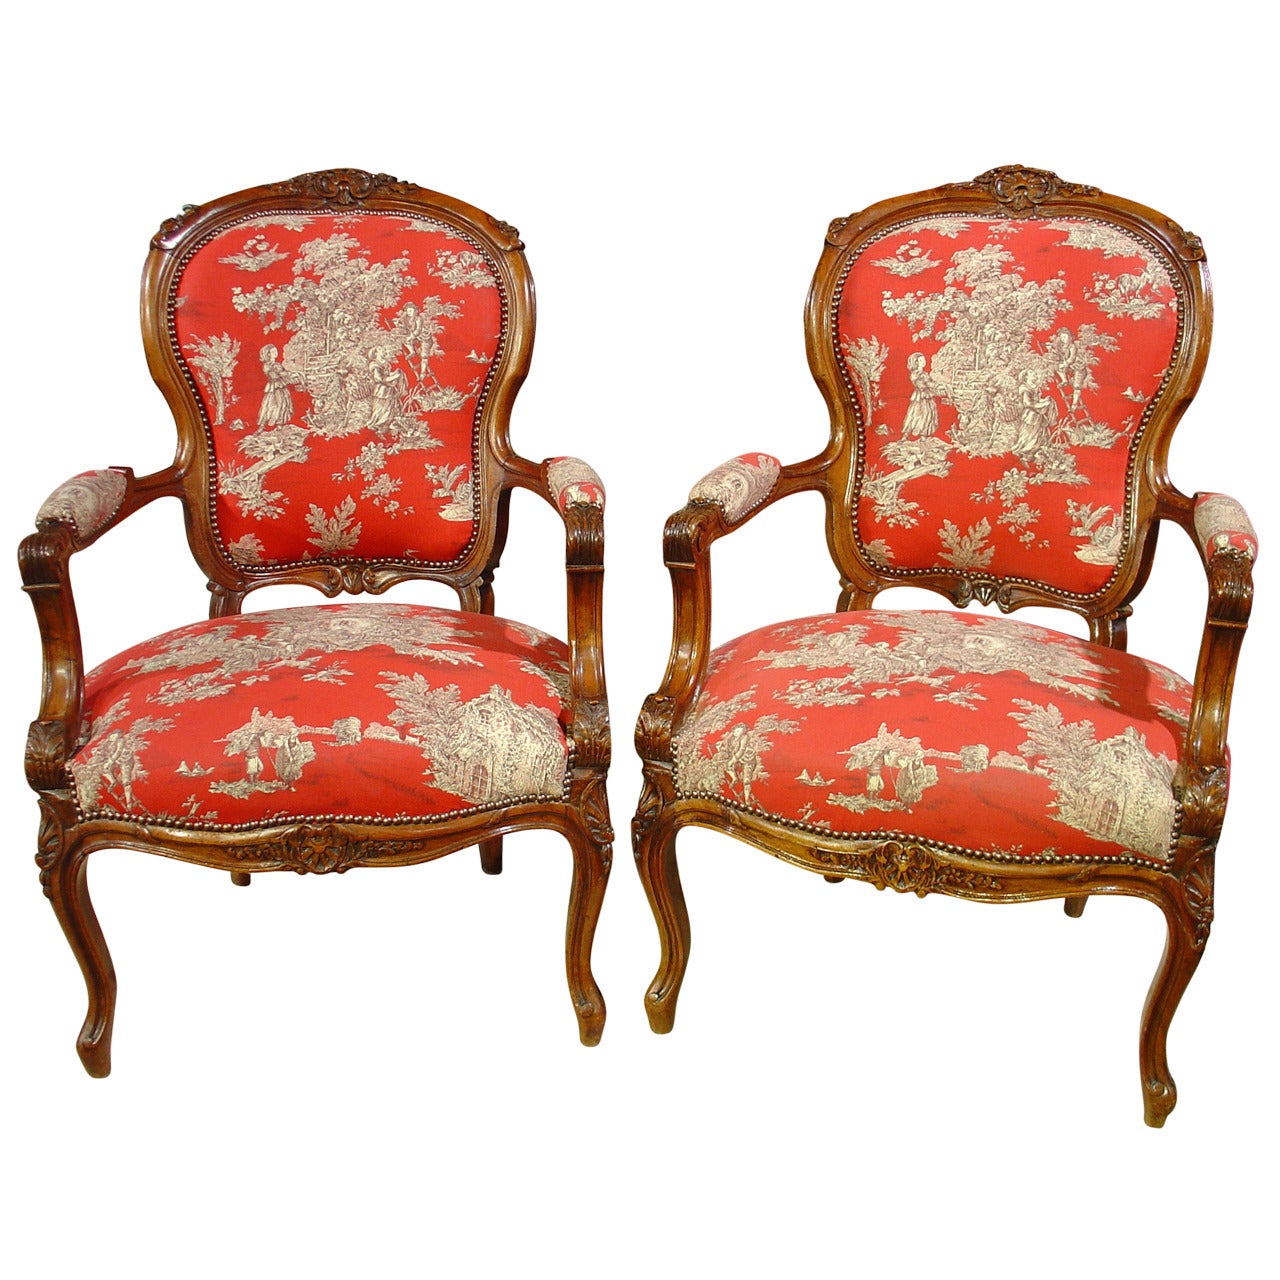 Pair of Louis XV Style Walnut Fauteuils with Toile de Jouy Upholstery